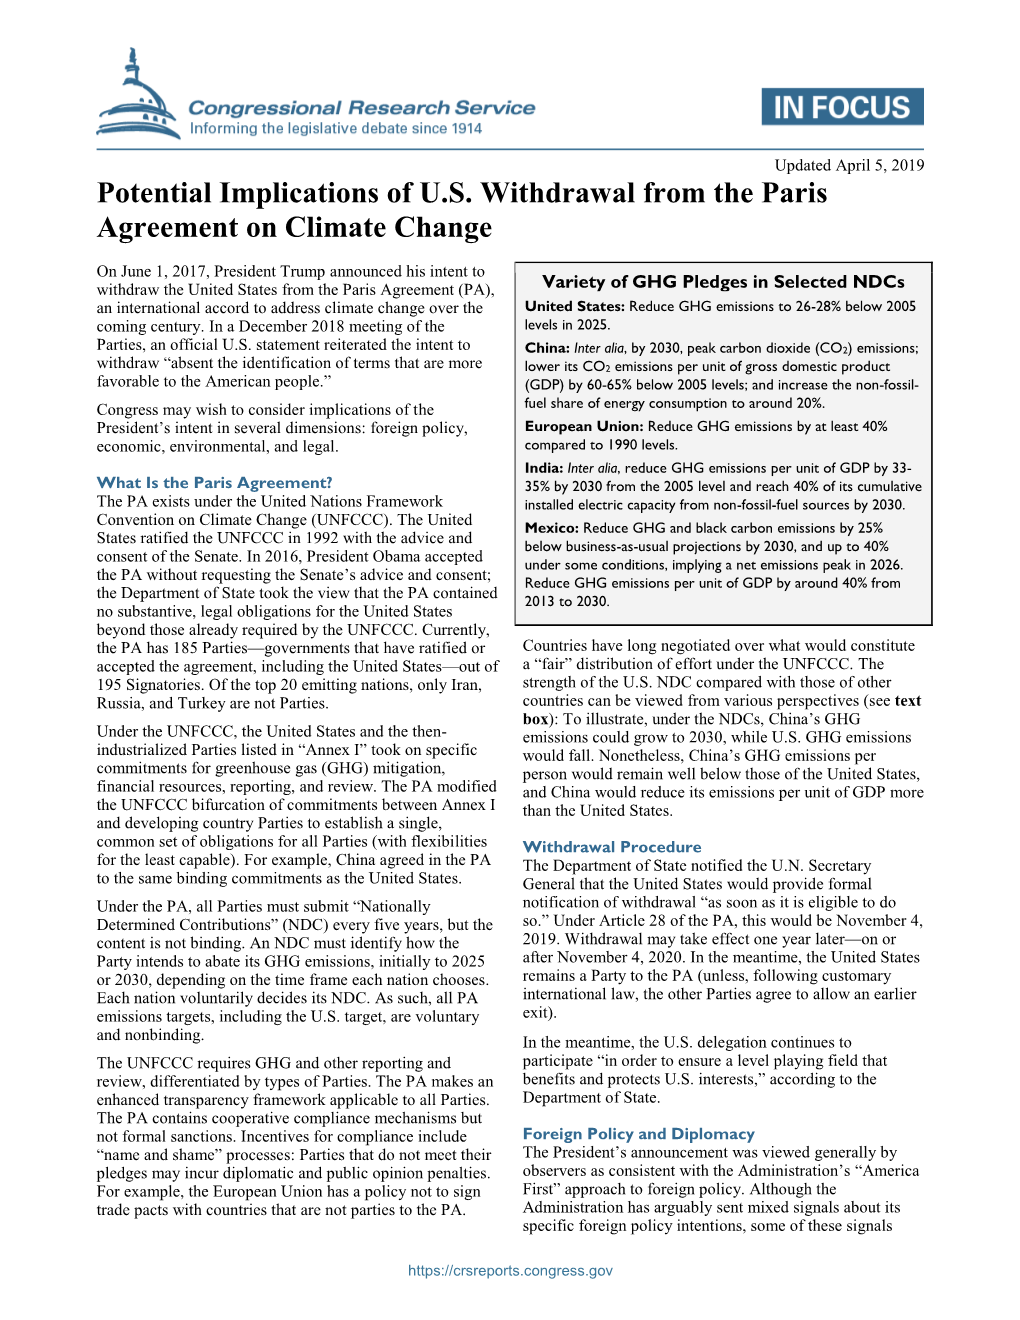 Potential Implications of U.S. Withdrawal from the Paris Agreement on Climate Change